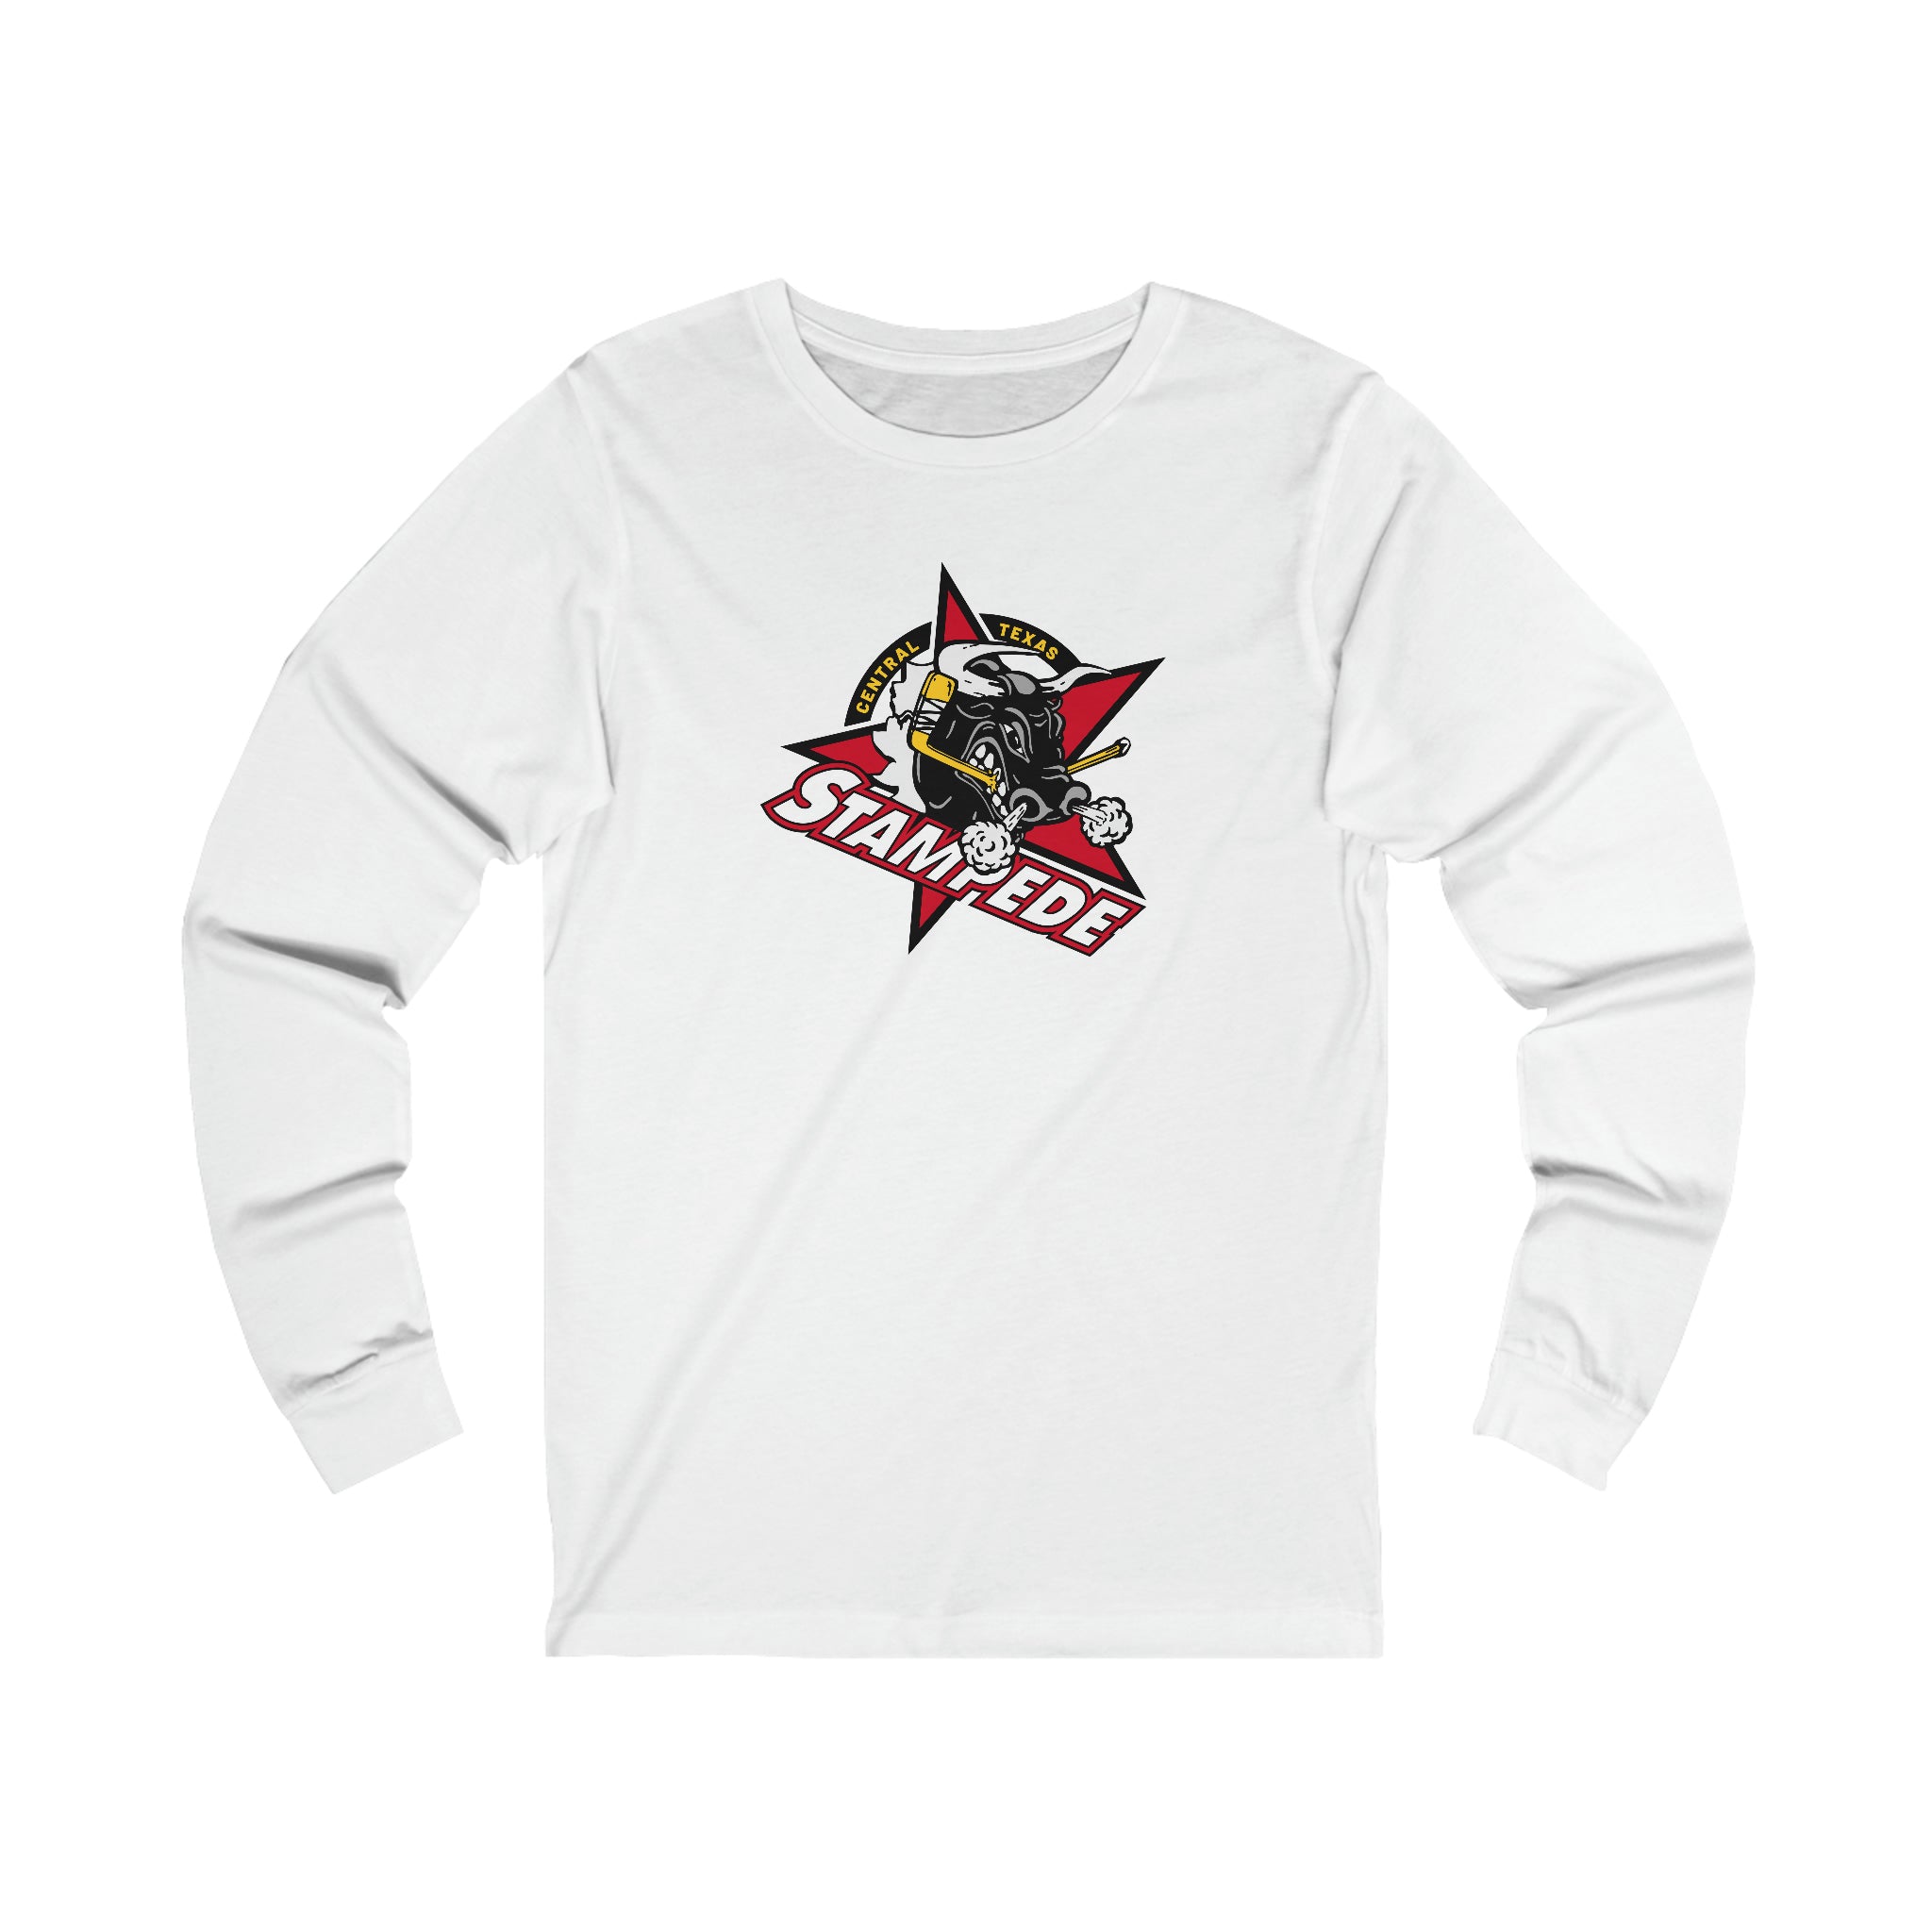 Central Texas Stampede Long Sleeve Shirt